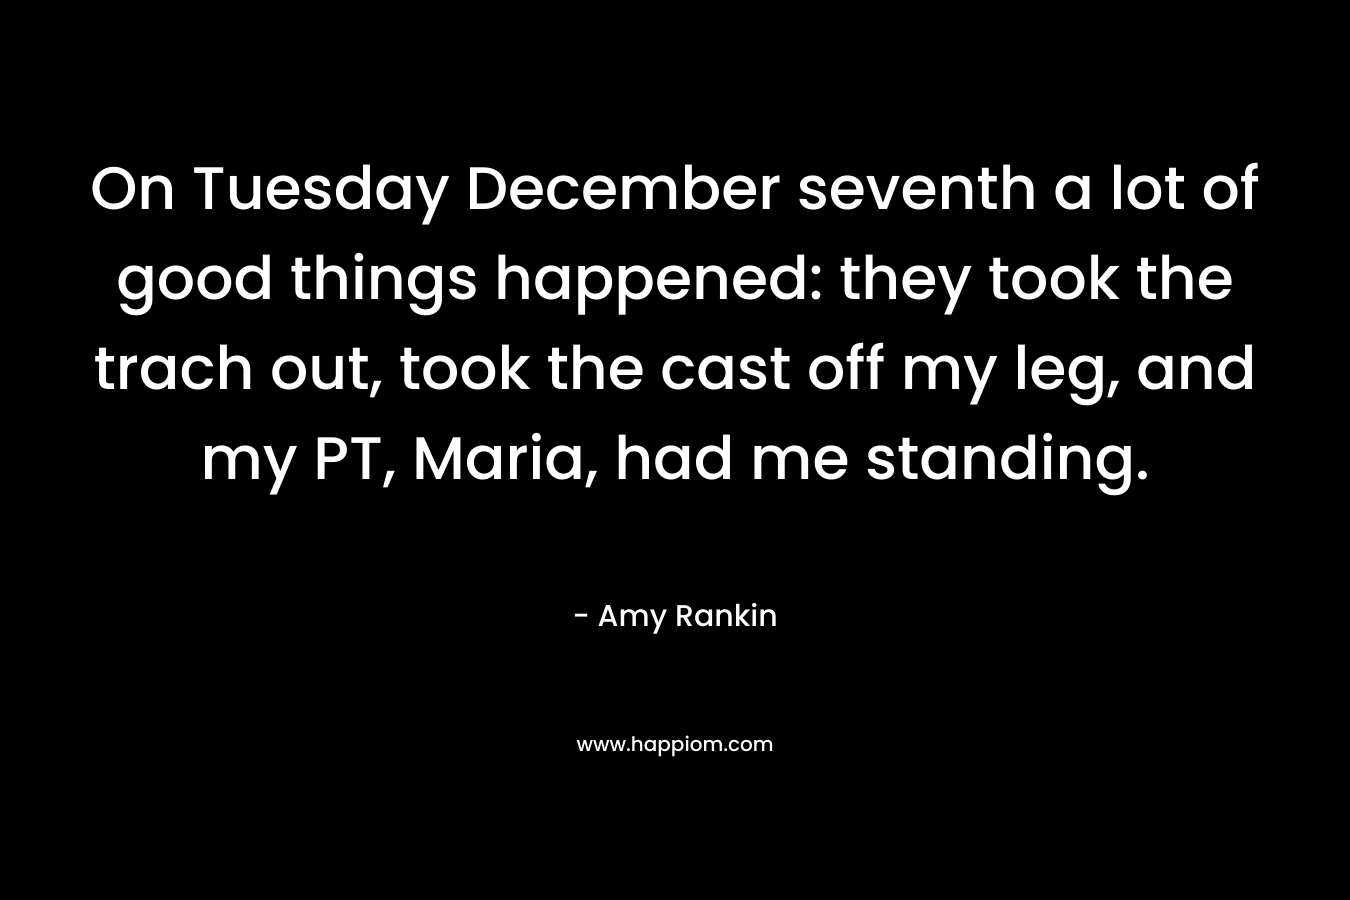 On Tuesday December seventh a lot of good things happened: they took the trach out, took the cast off my leg, and my PT, Maria, had me standing. – Amy Rankin